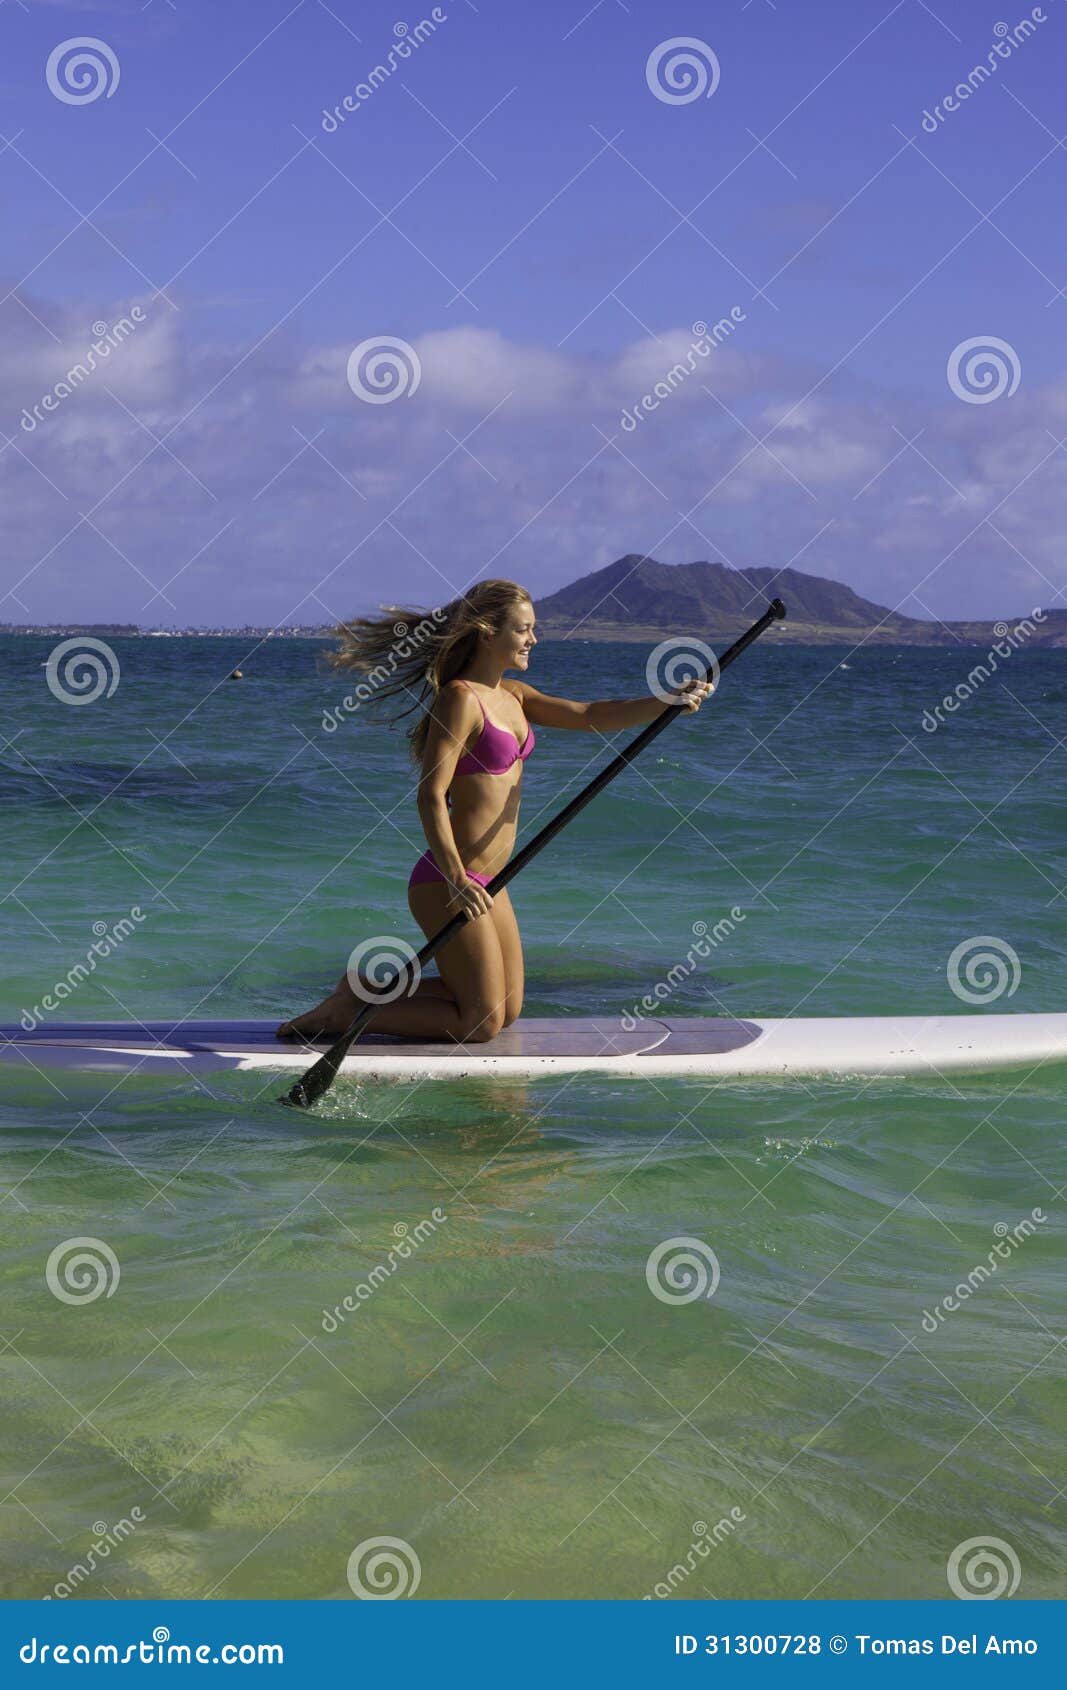  On Stand Up Paddle Board Royalty Free Stock Photos - Image: 31300728